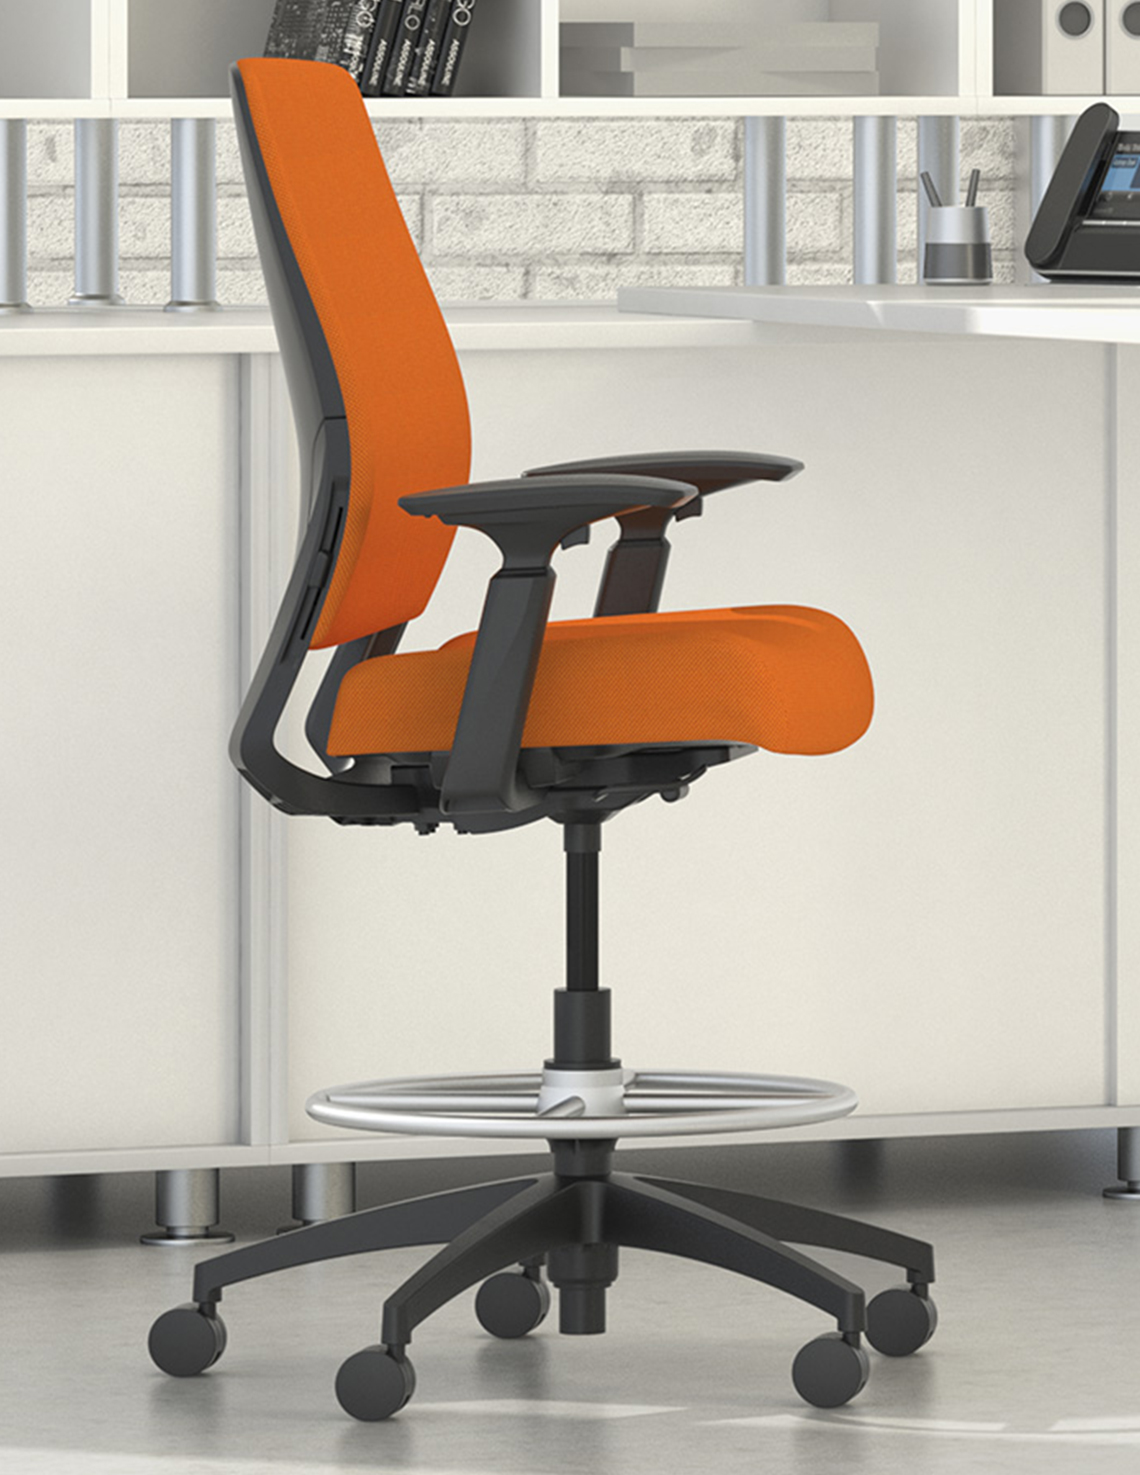 Sleek, aerodynamic lines give this task chair a modern design and plenty of comfort